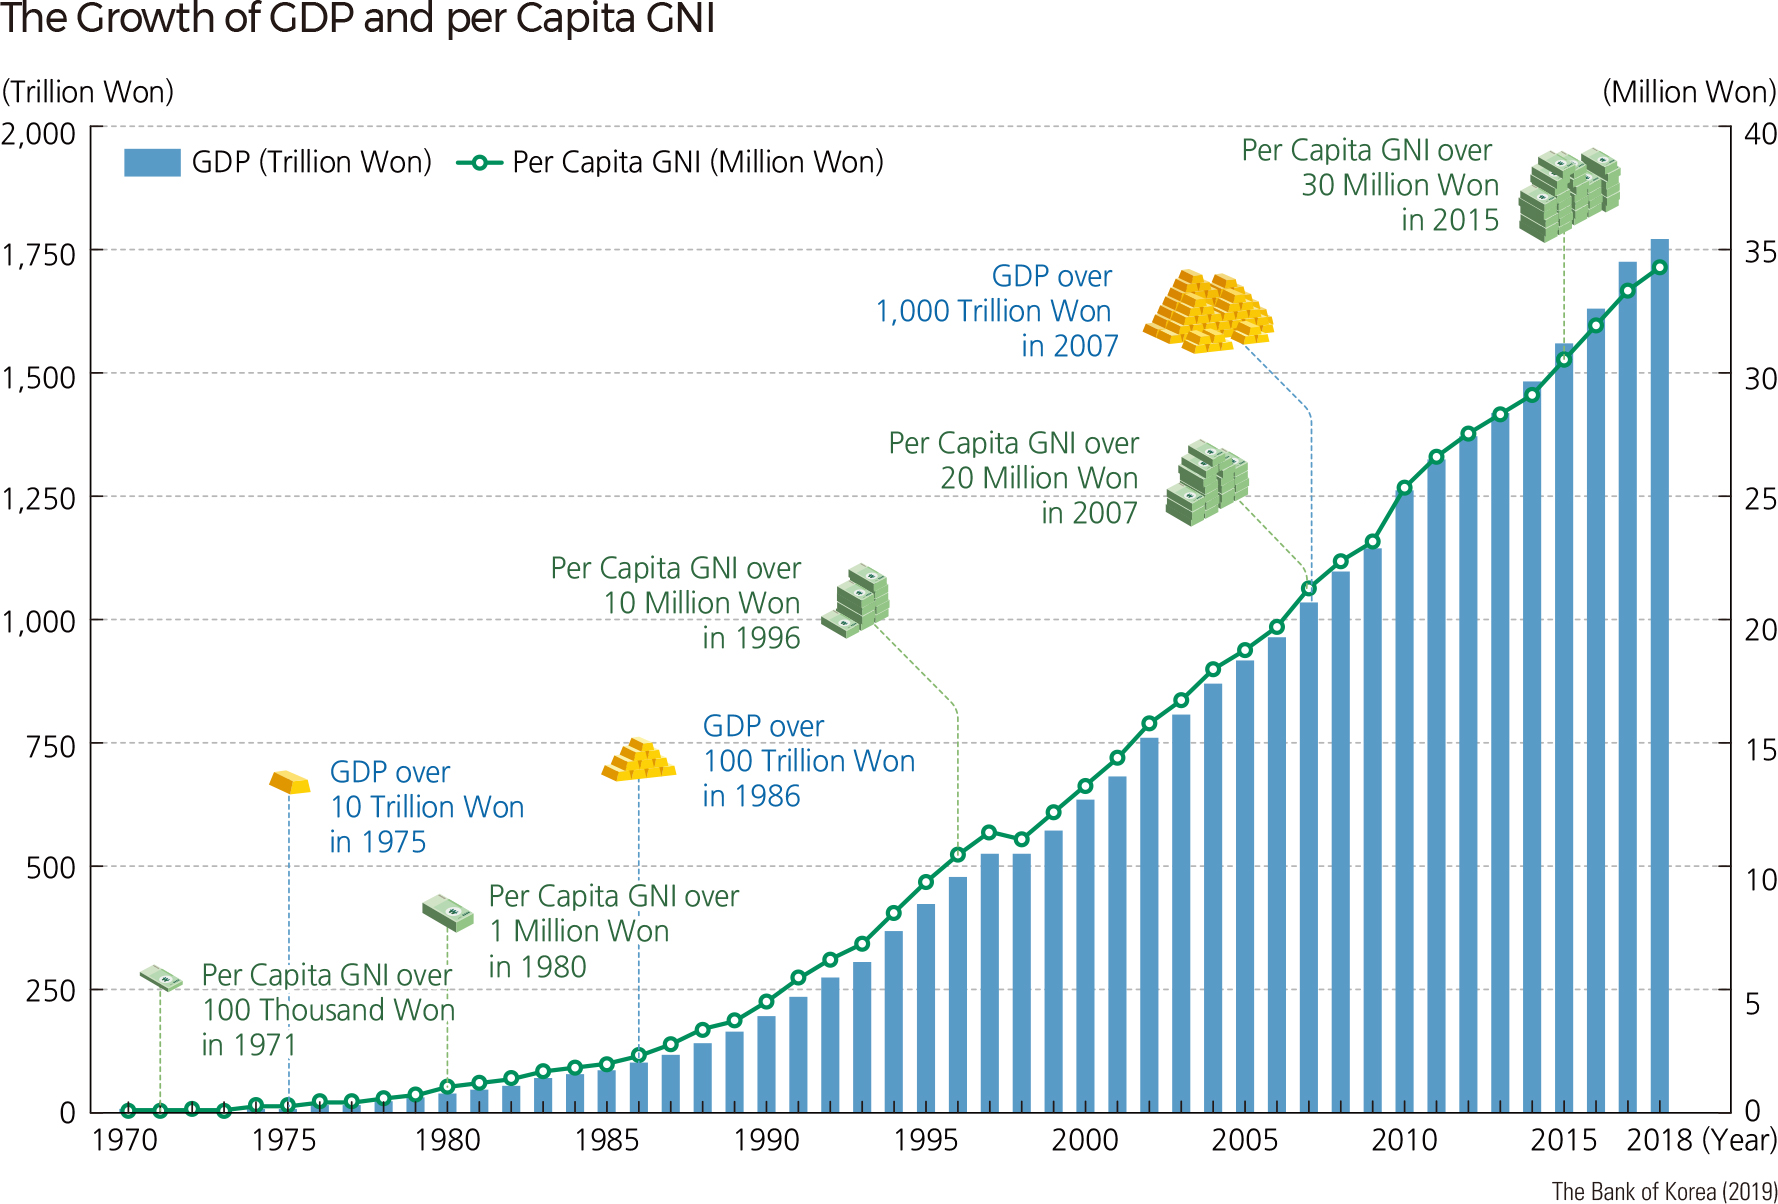 The Growth of GDP and per Capita GNI